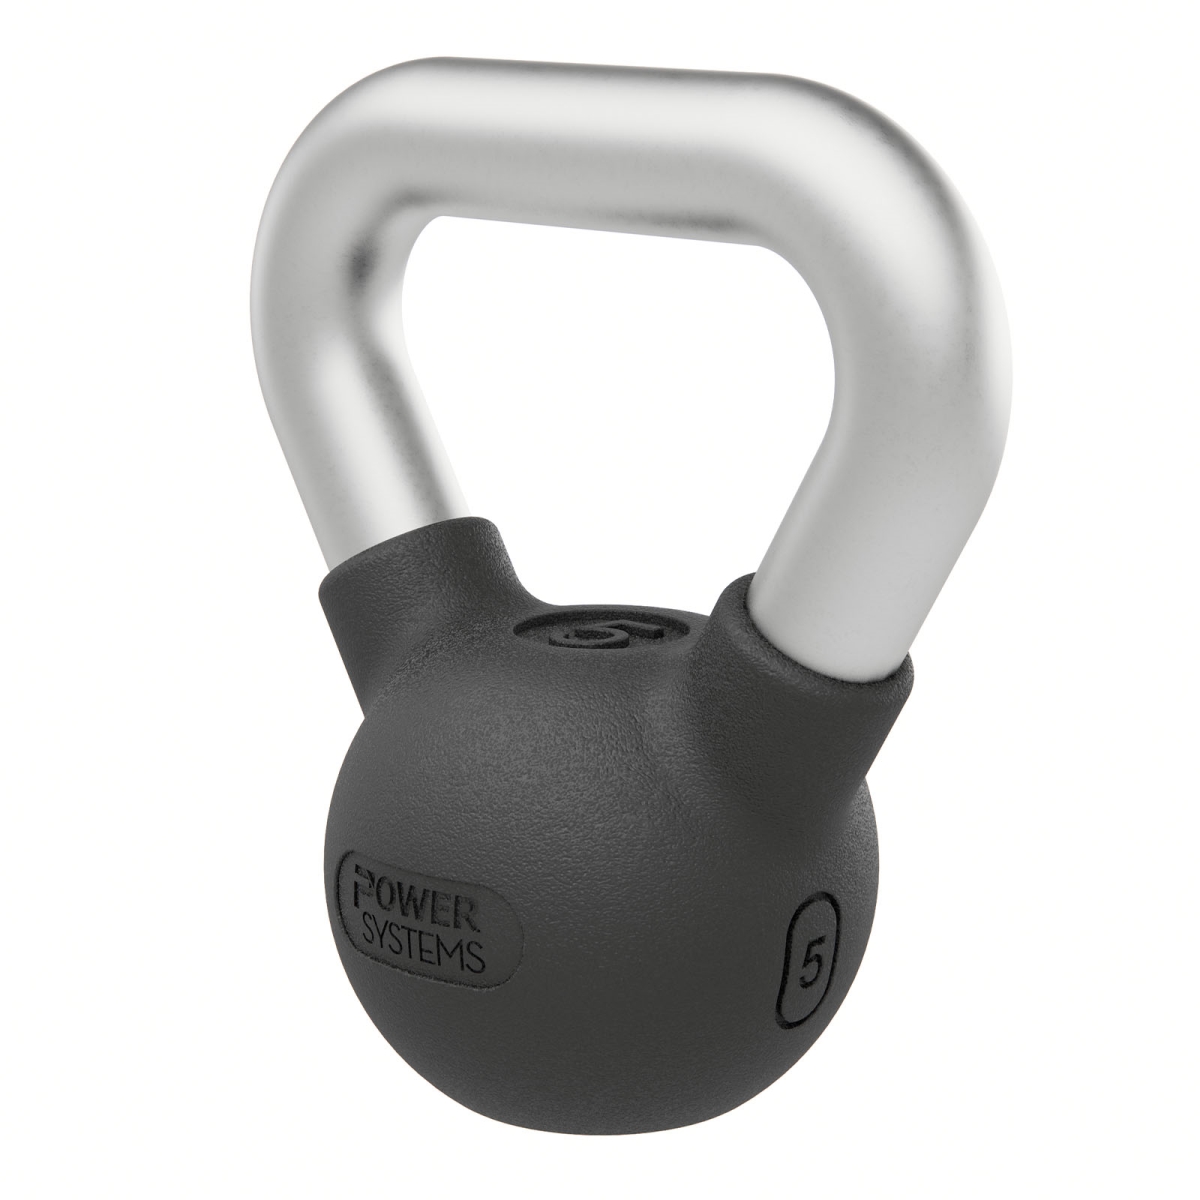 Picture of Power Systems 22899 Power Systems Elite Kettlebell 5 lb.